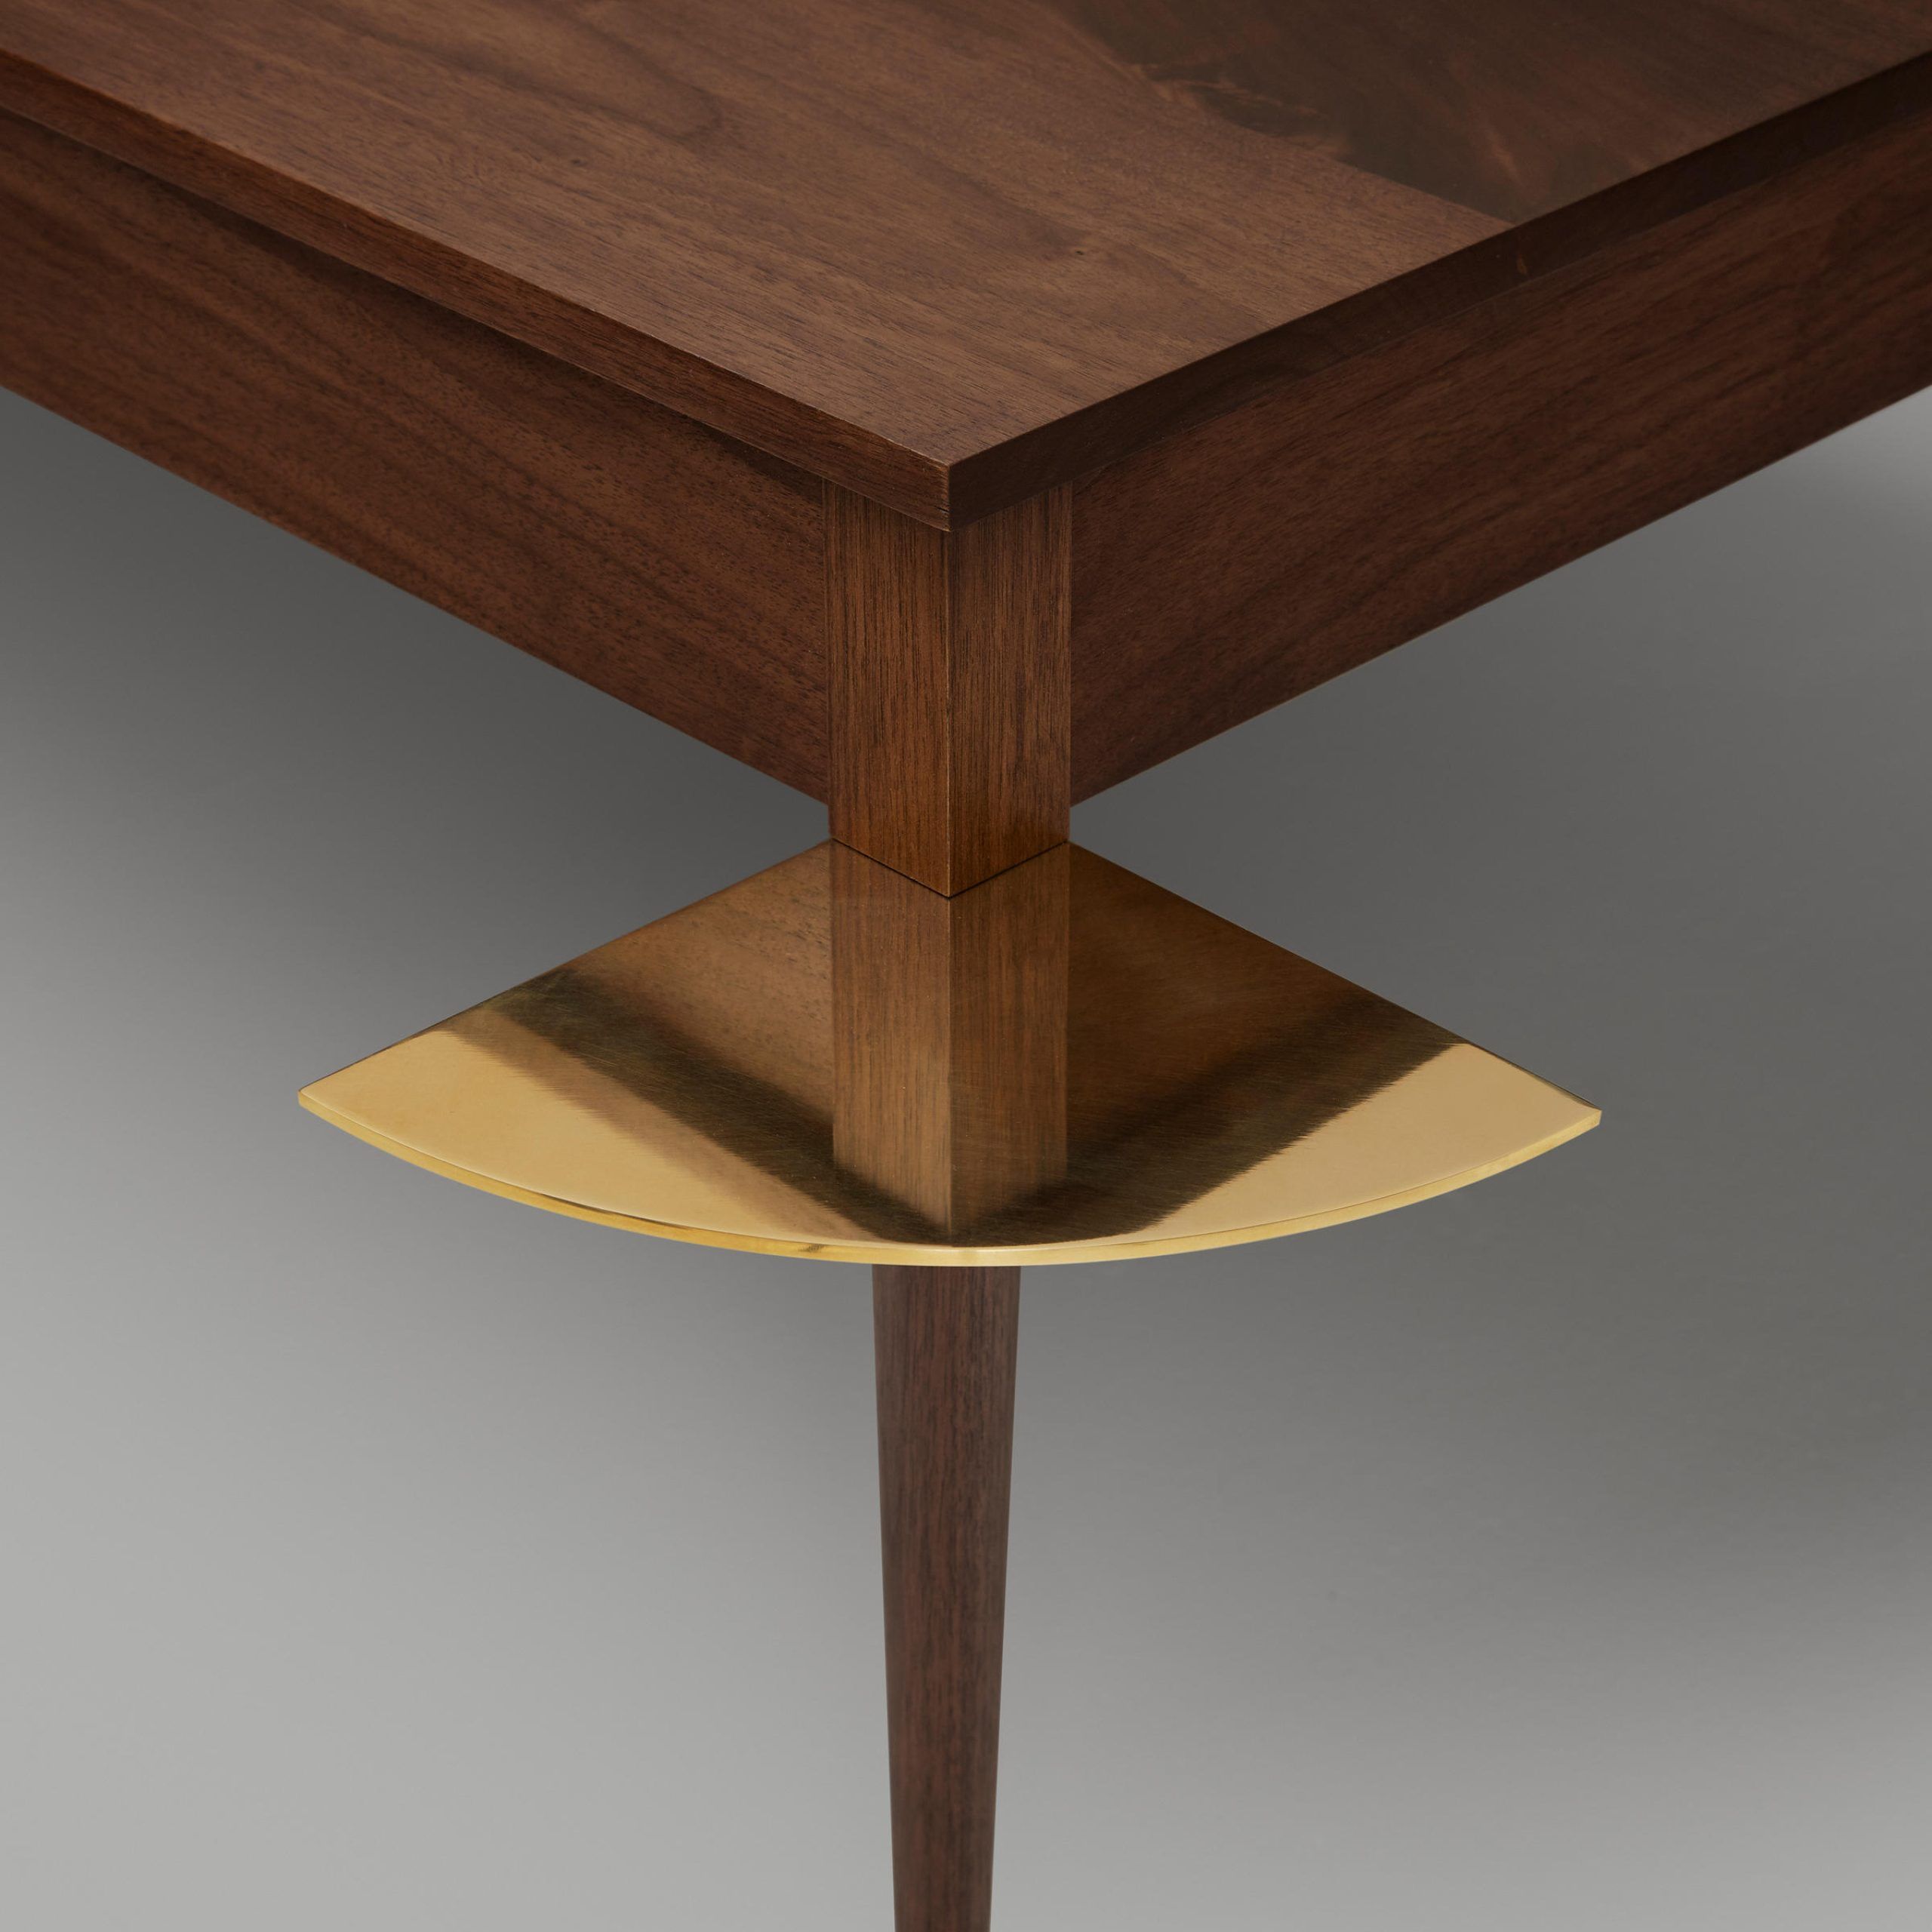 The Cain Coffee Table (black Walnut) | Architonic With Regard To Regency Cain Steel Coffee Tables (Gallery 9 of 20)